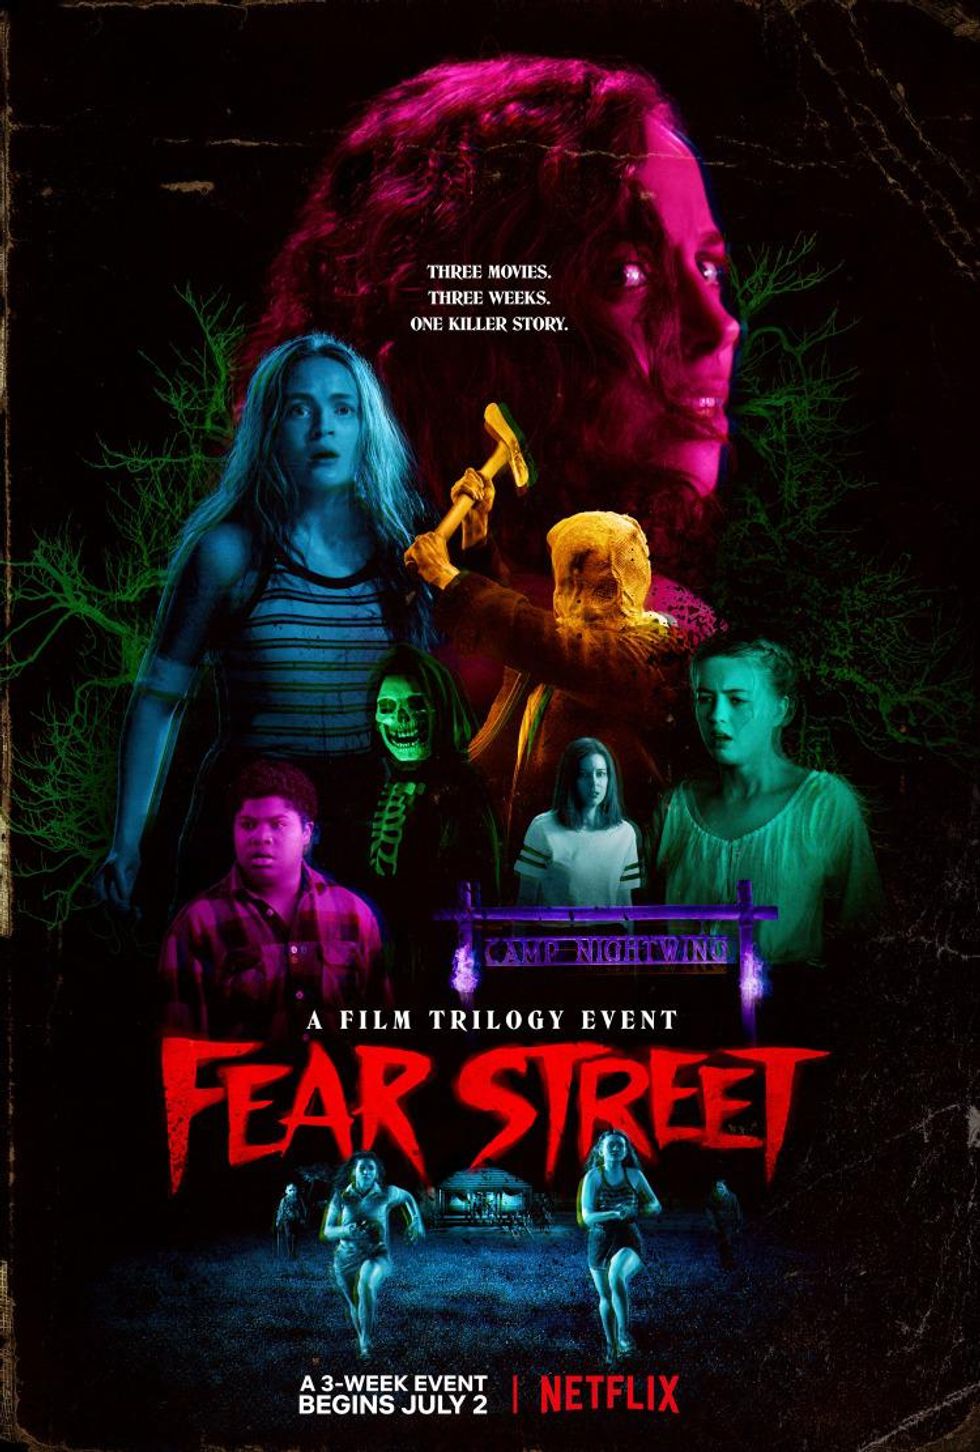 Netflix's New Horror Trilogy 'Fear Street' Features a Queer Couple